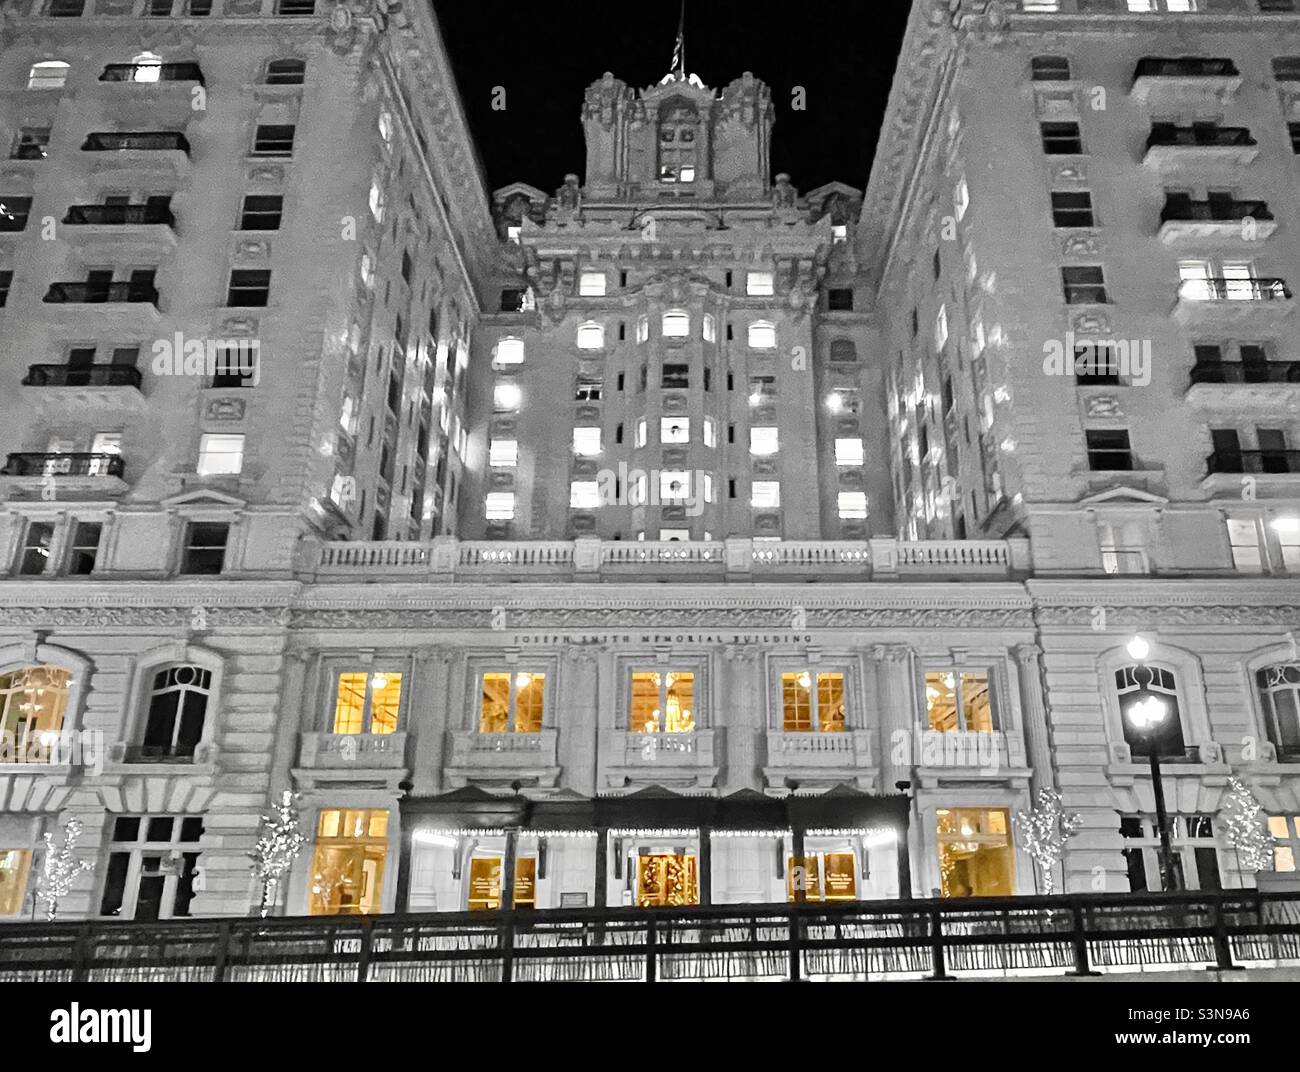 The Joseph Smith Memorial Building, or the former Hotel Utah, in downtown Salt Lake City, Utah, USA during the holidays. The building is desaturated except for the yellow light from the lower windows. Stock Photo